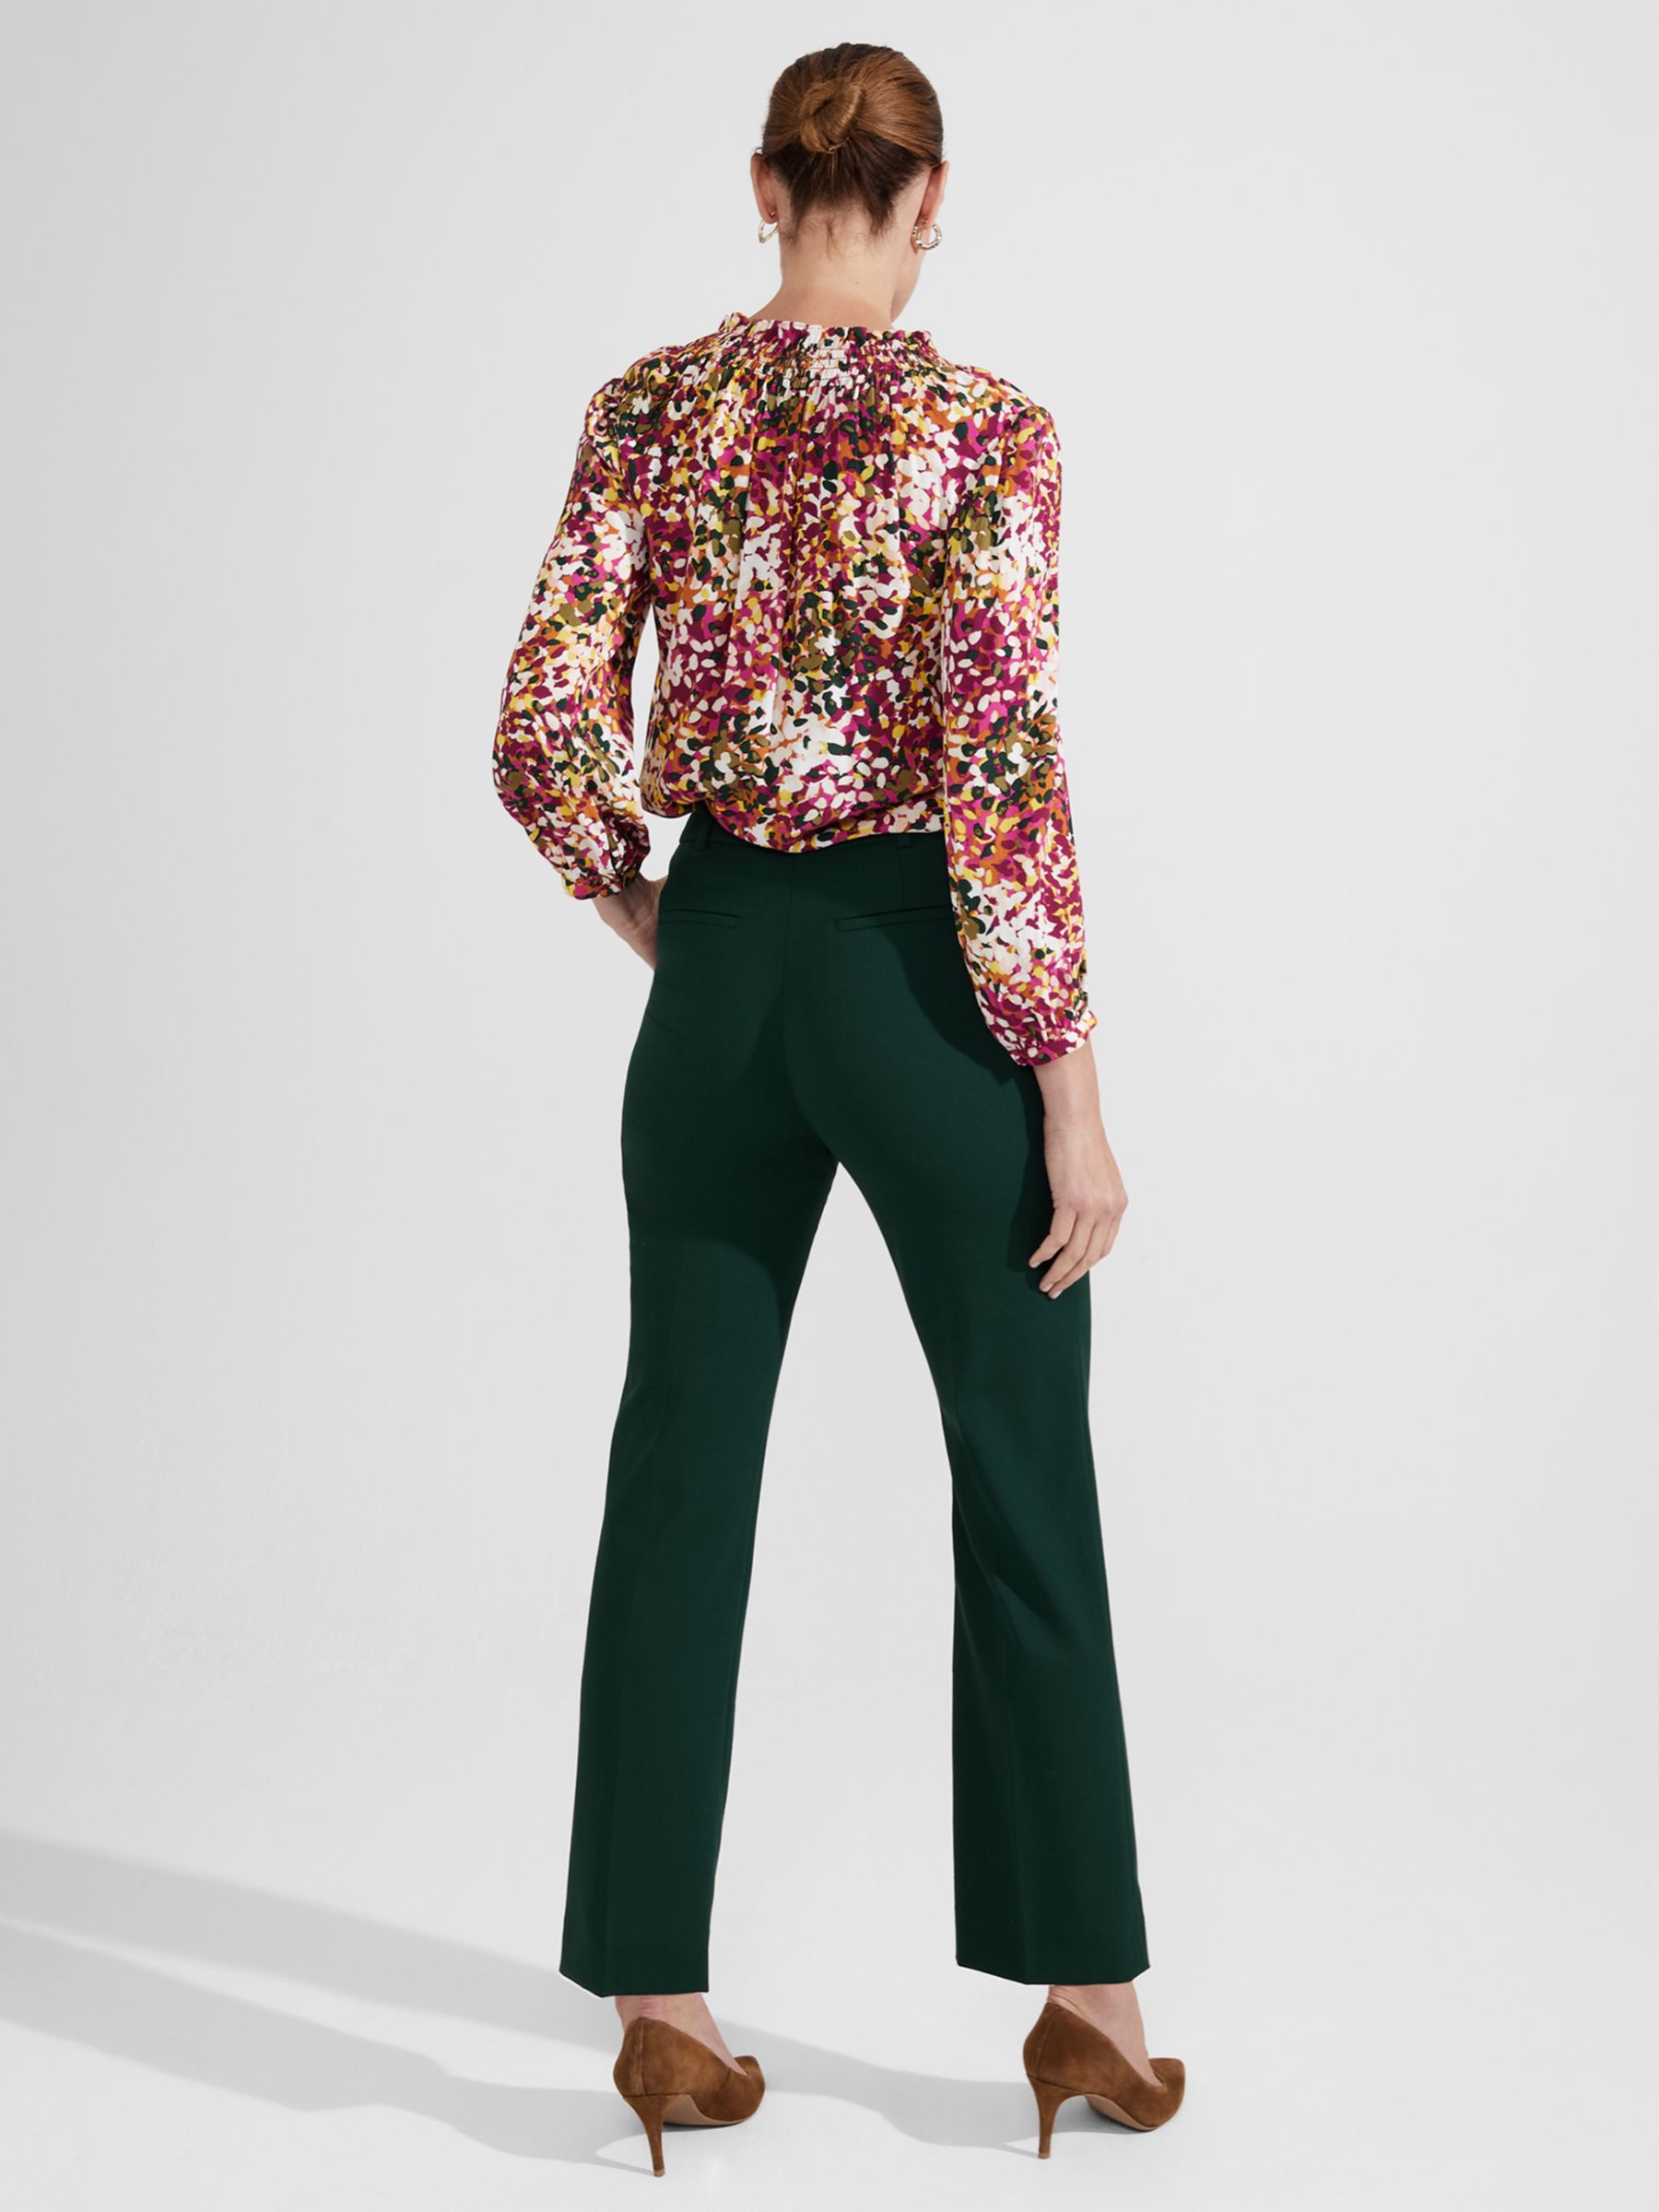 Hobbs Grace Straight Leg Trousers, Holly Green at John Lewis & Partners